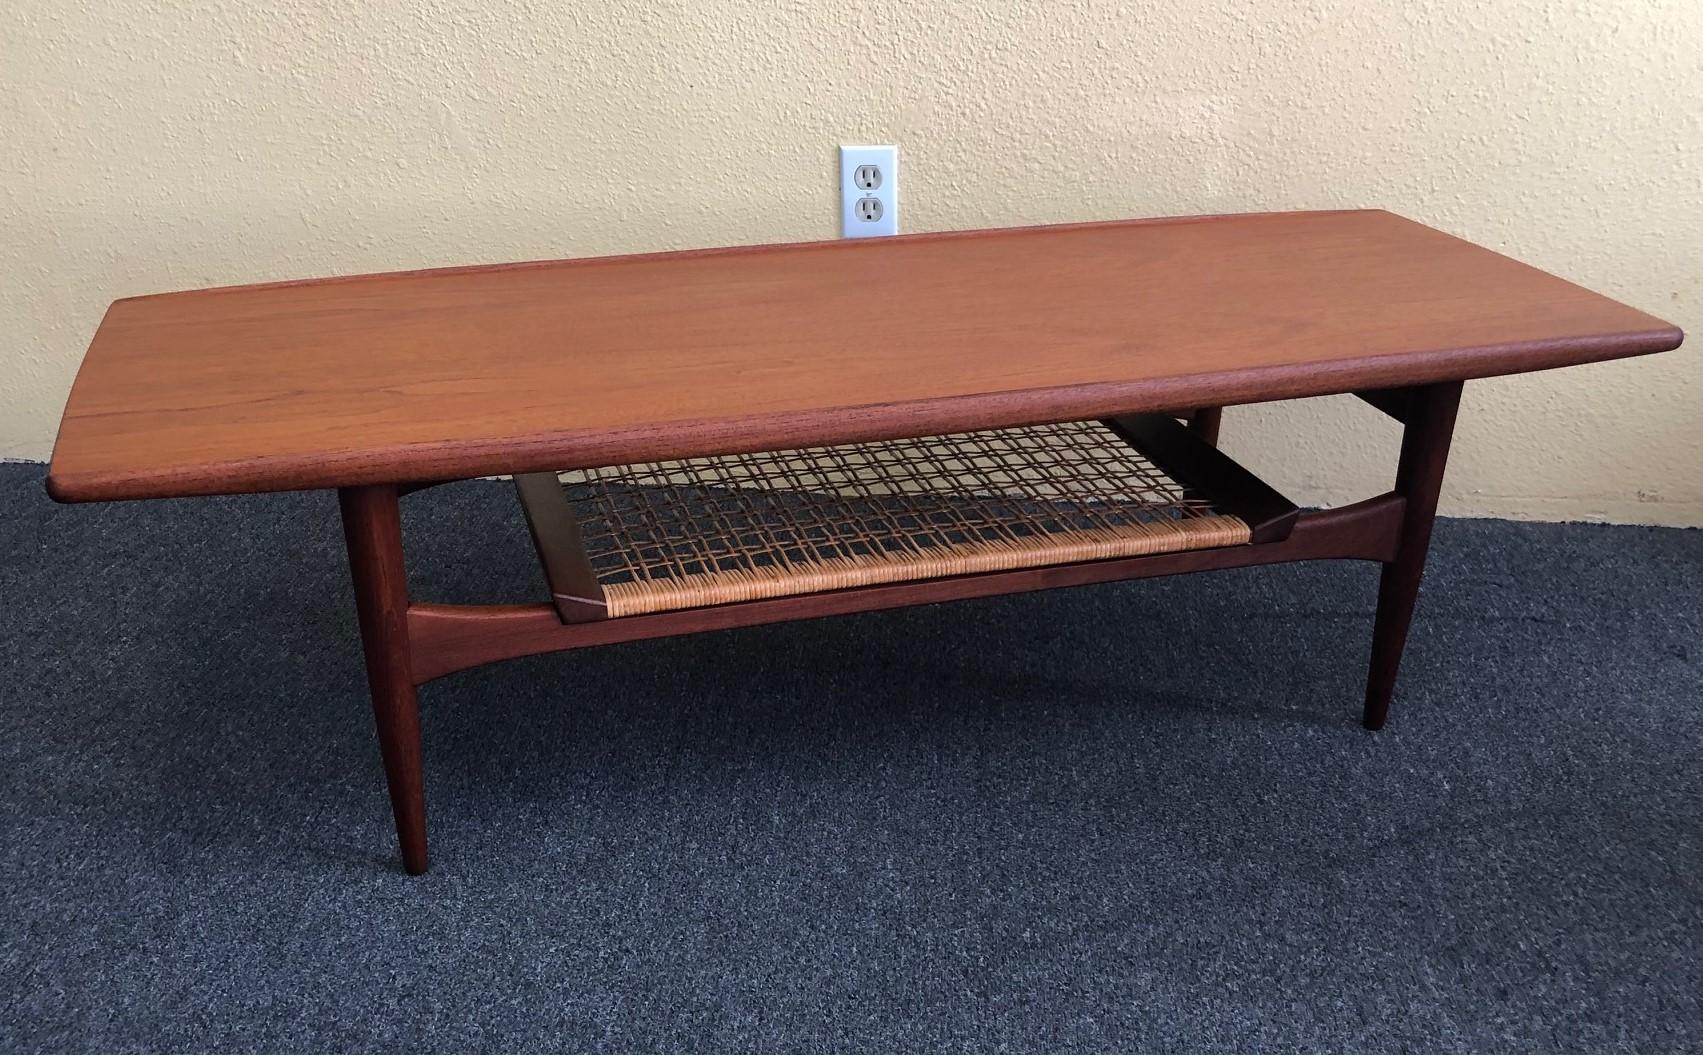 Stunning Danish modern two-tier, surfboard style teak coffee table attributed to Hans Wegner by Moreddi, circa 1960's. Features include a turned edge running the width of the table and a lower level caned shelf which has an interesting raised edge.